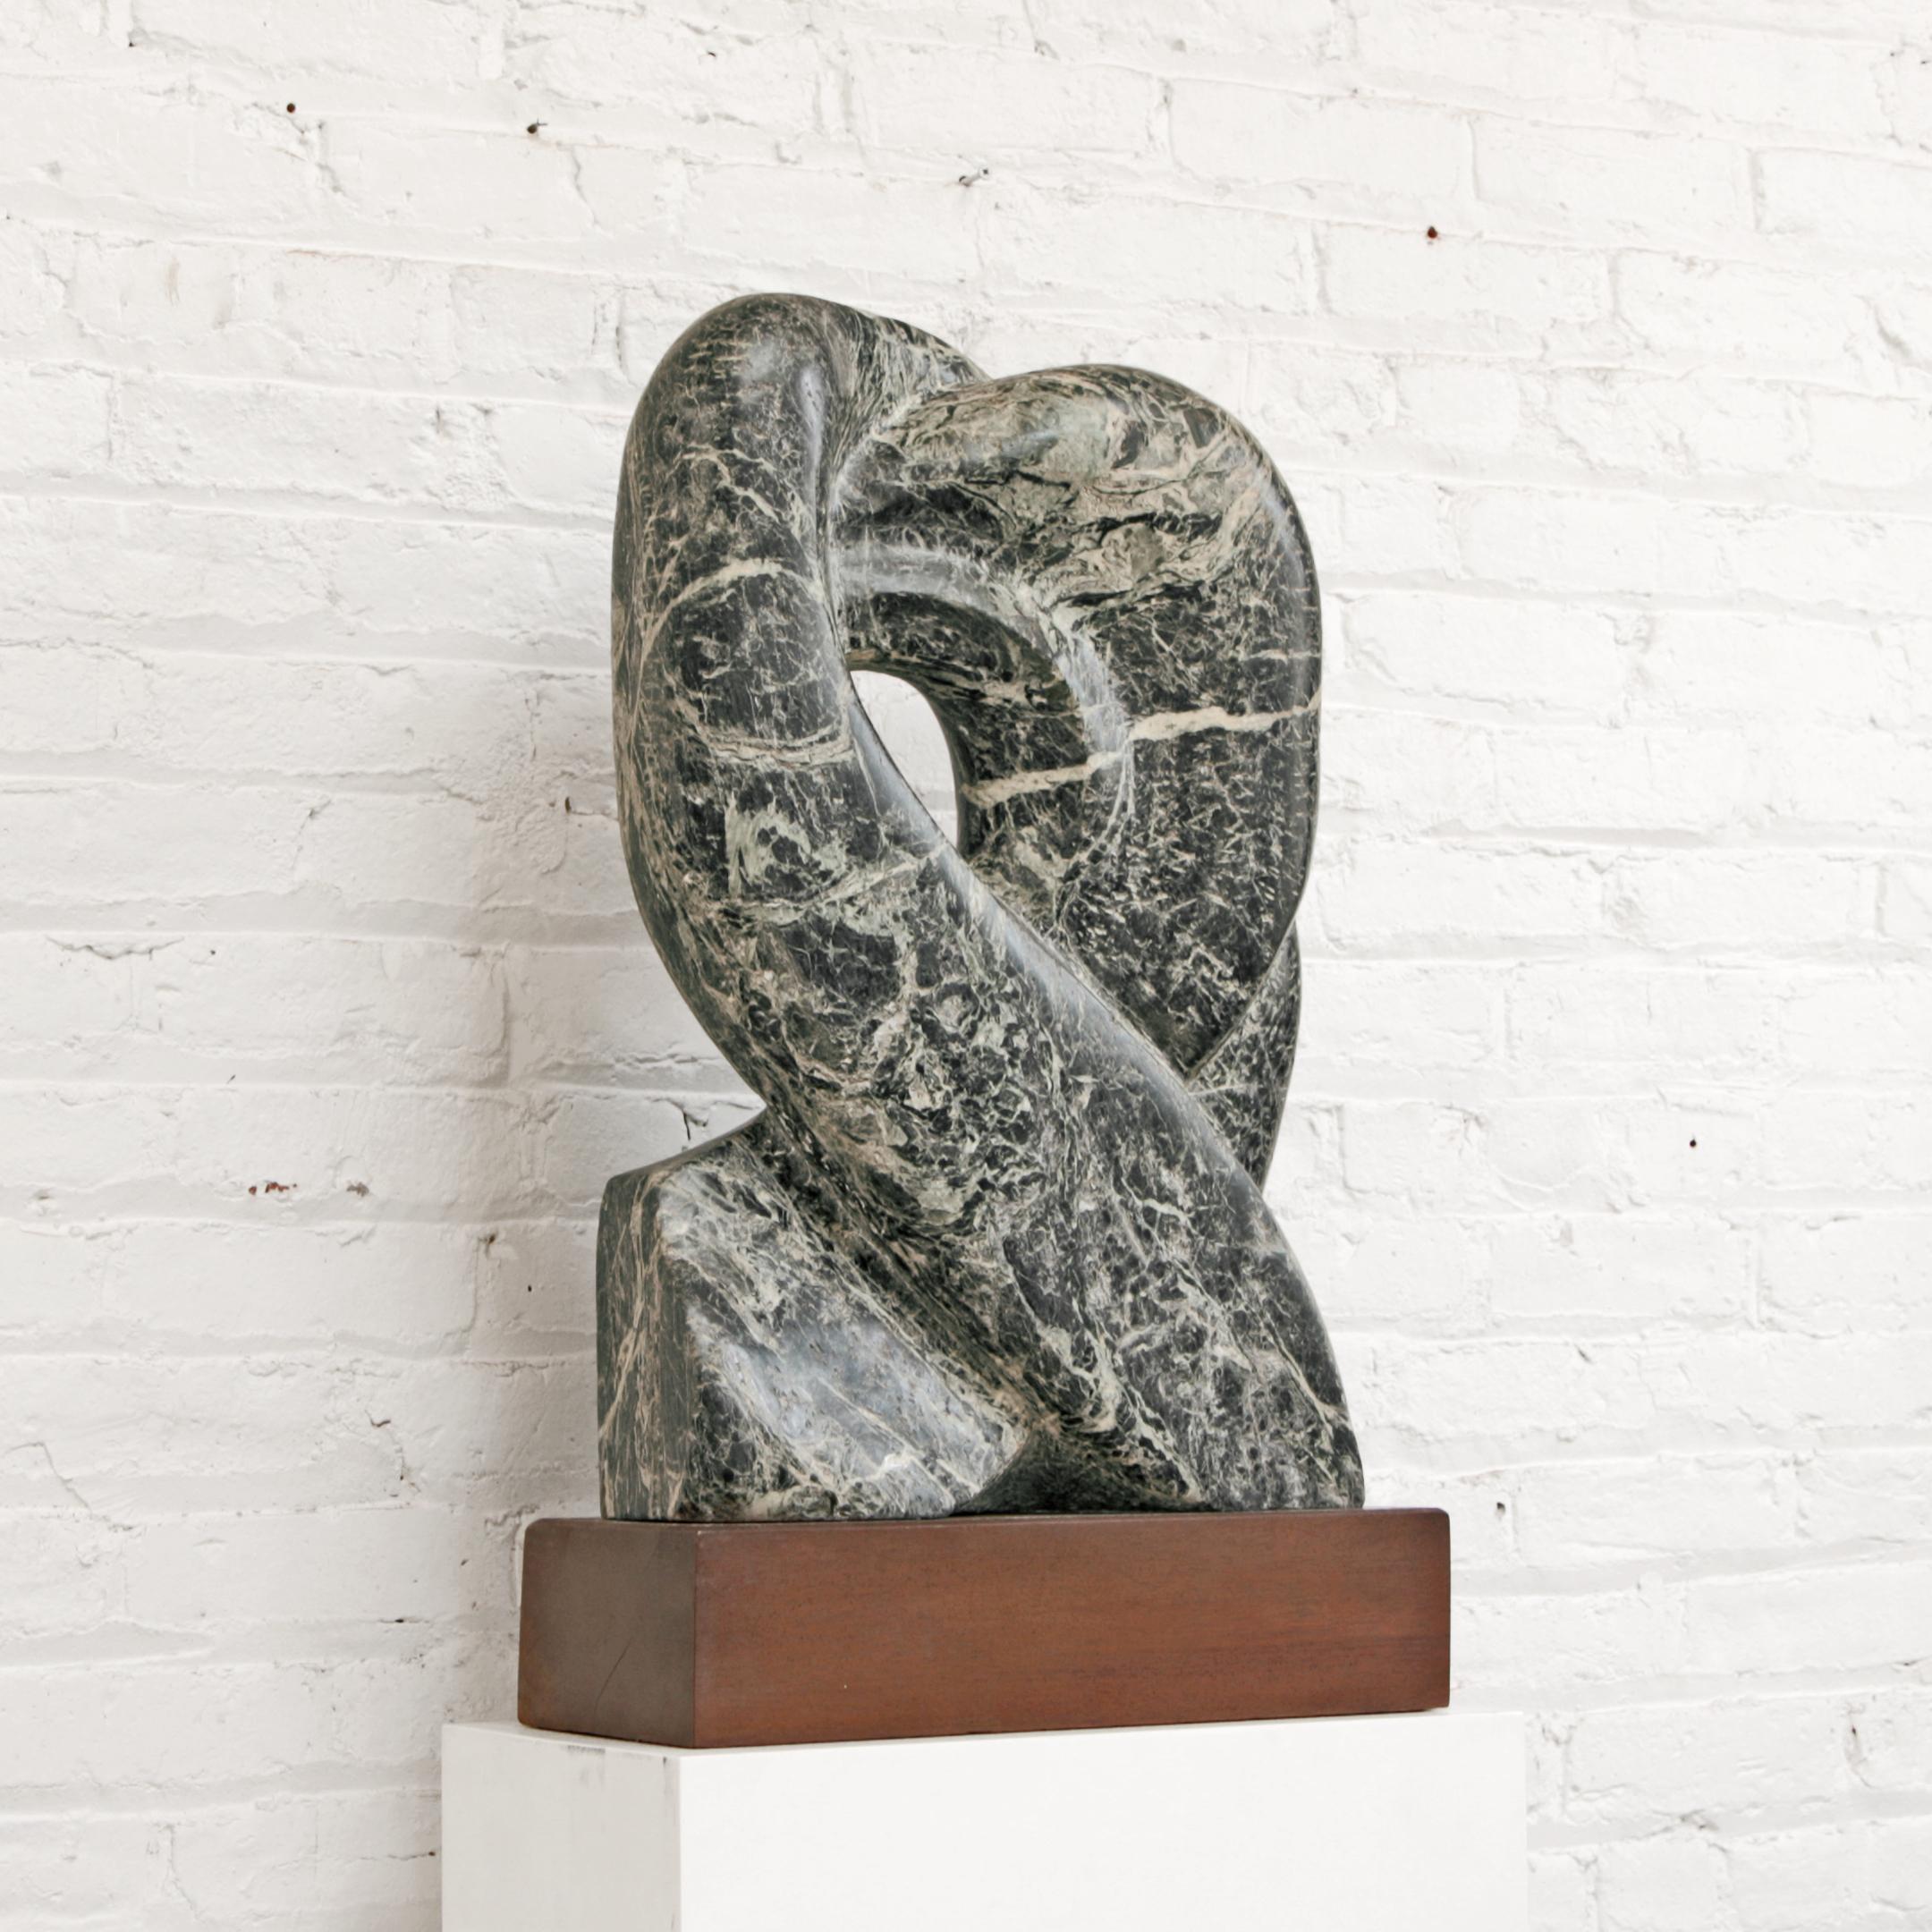 Modernist marble sculpture. Blue, green, grey and white marble sculpted in abstract organic form mounted on wood pedestal.